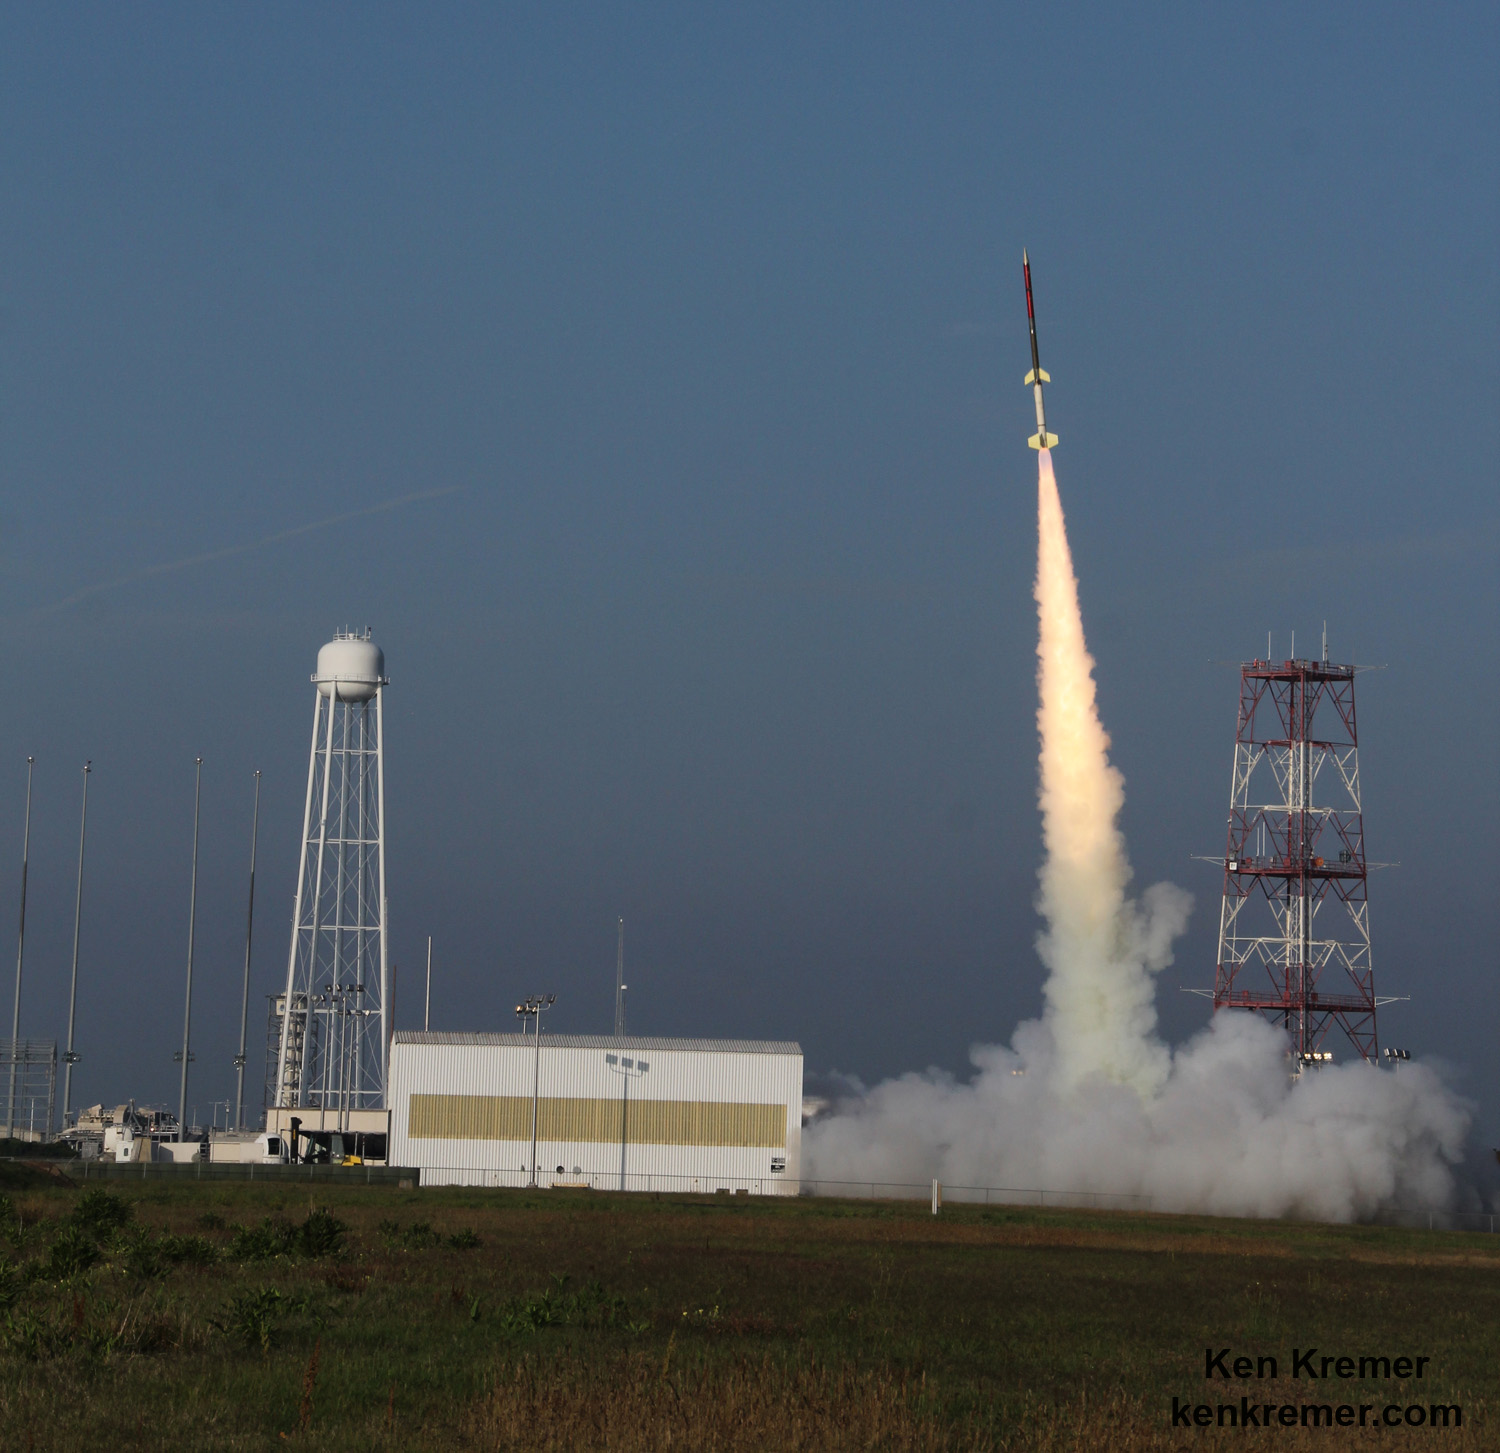 Launch of RockOn suborbital Terrier-Improved Orion sounding rocket carrying student-built research payloads from NASA’s beachside Wallops Flight Facility in Virginia at 7:21 a.m. EDT on June 26, 2014. Credit: Ken Kremer - kenkremer.com/AmericaSpace